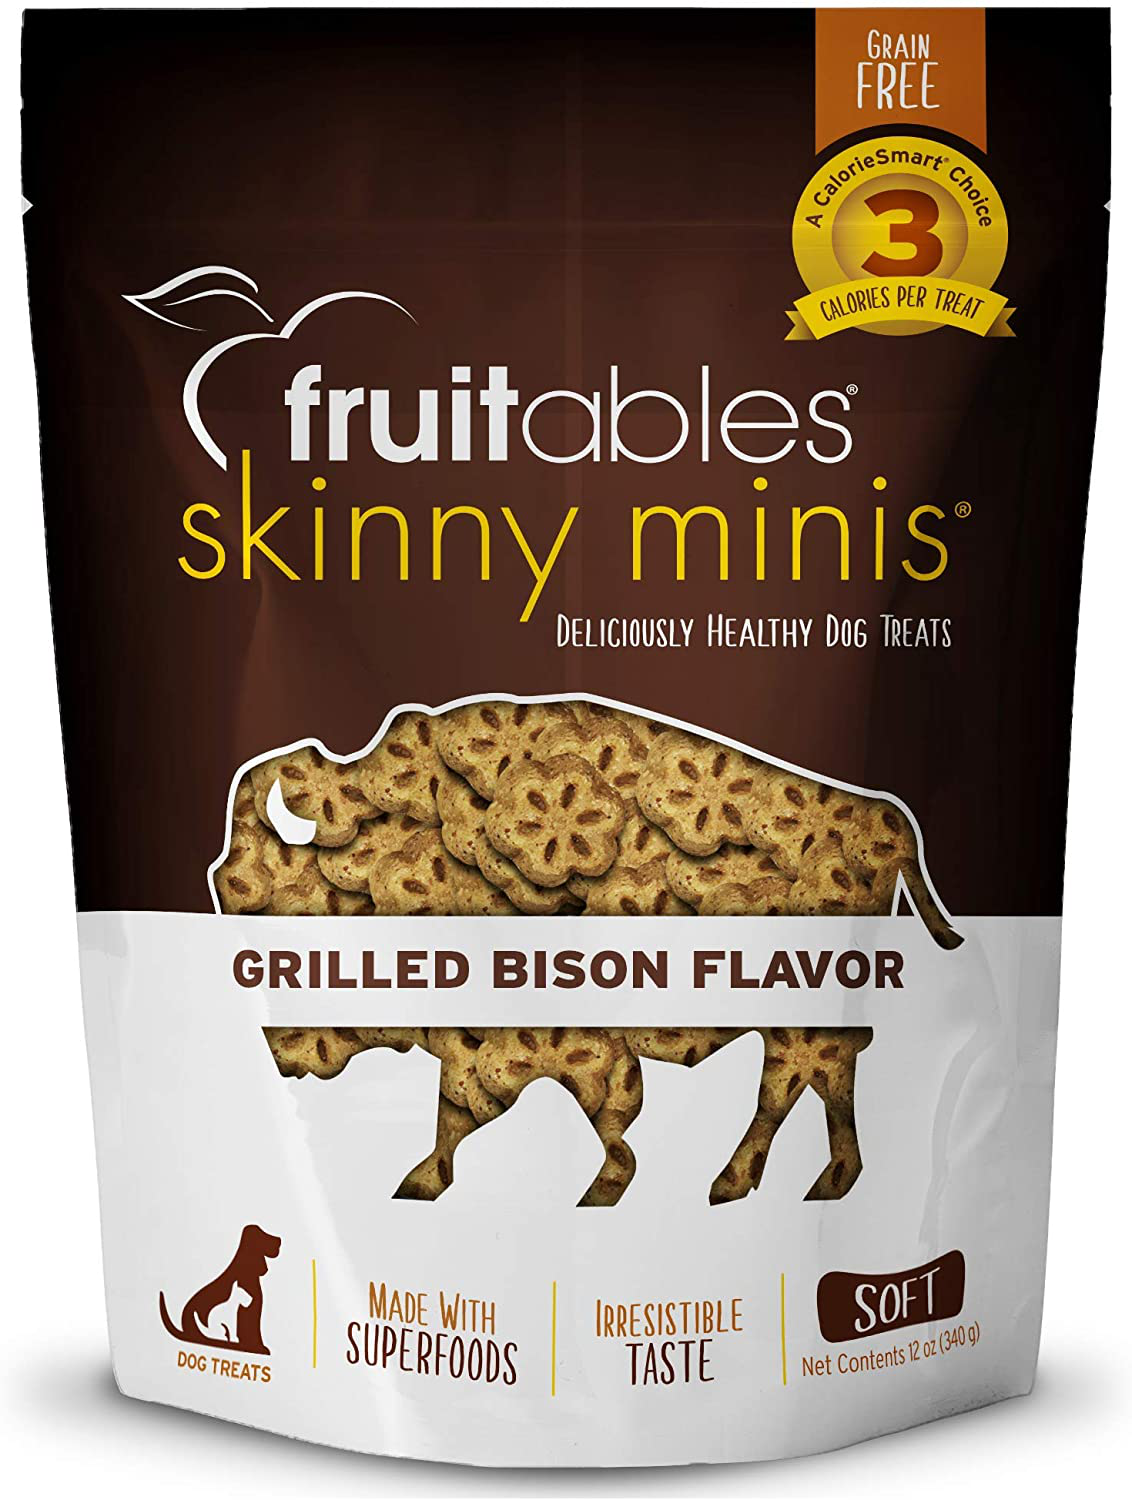 Fruitables Skinny Mini Dog Treats | Healthy Treats for Dogs | Low Calorie Training Treats | Free of Wheat, Corn and Soy